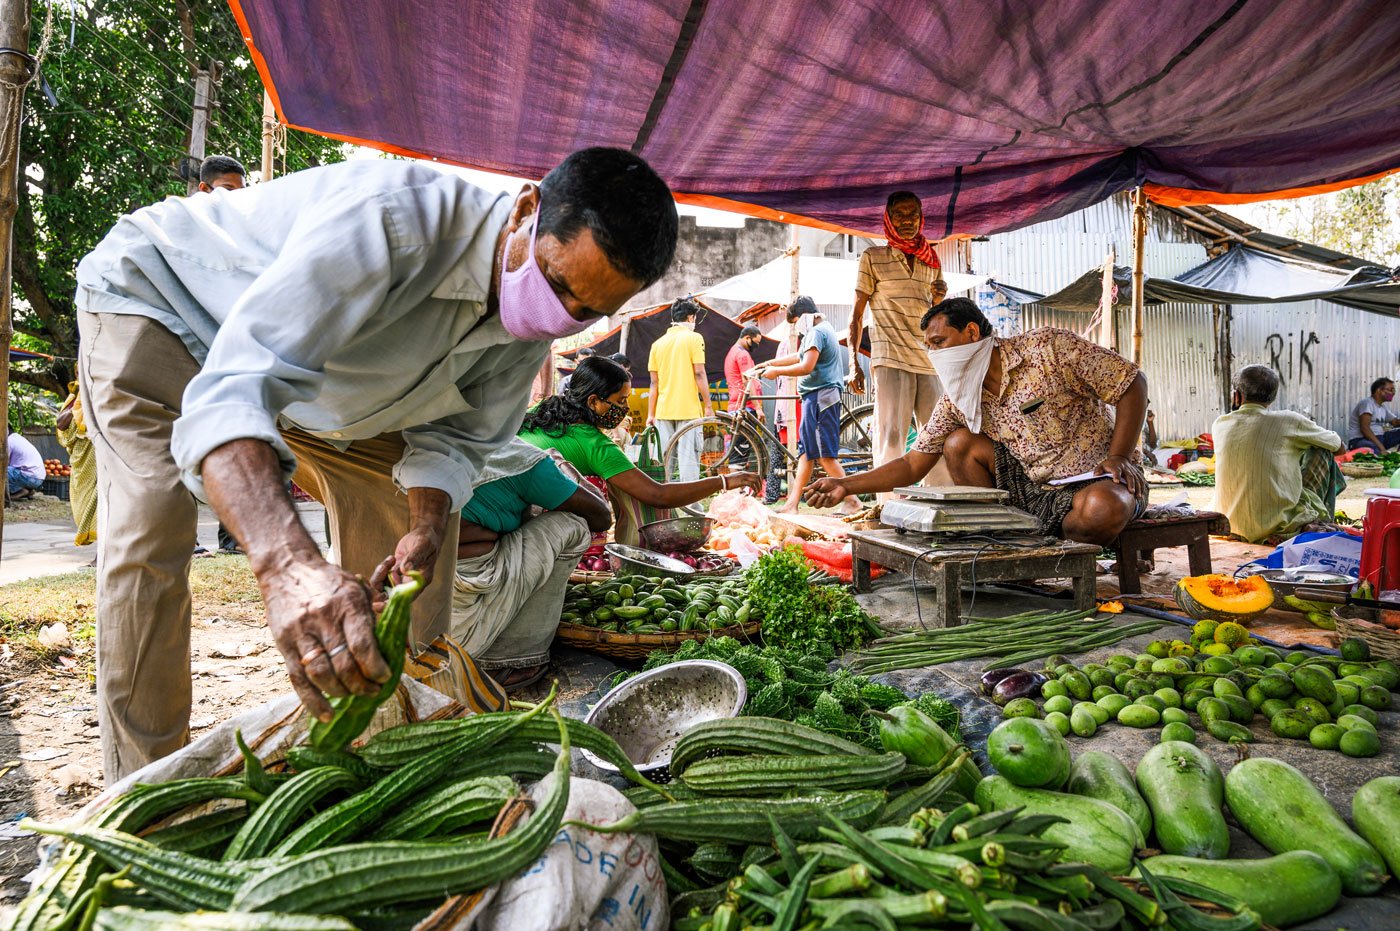 Customers picking up vegetable from Parimal Dalal’s stall. After 30 years of doing this work, 51-year-old Parimal, is more confident than the others, and says, "My business hasn't changed much. Customers I am acquainted with are coming here too."

